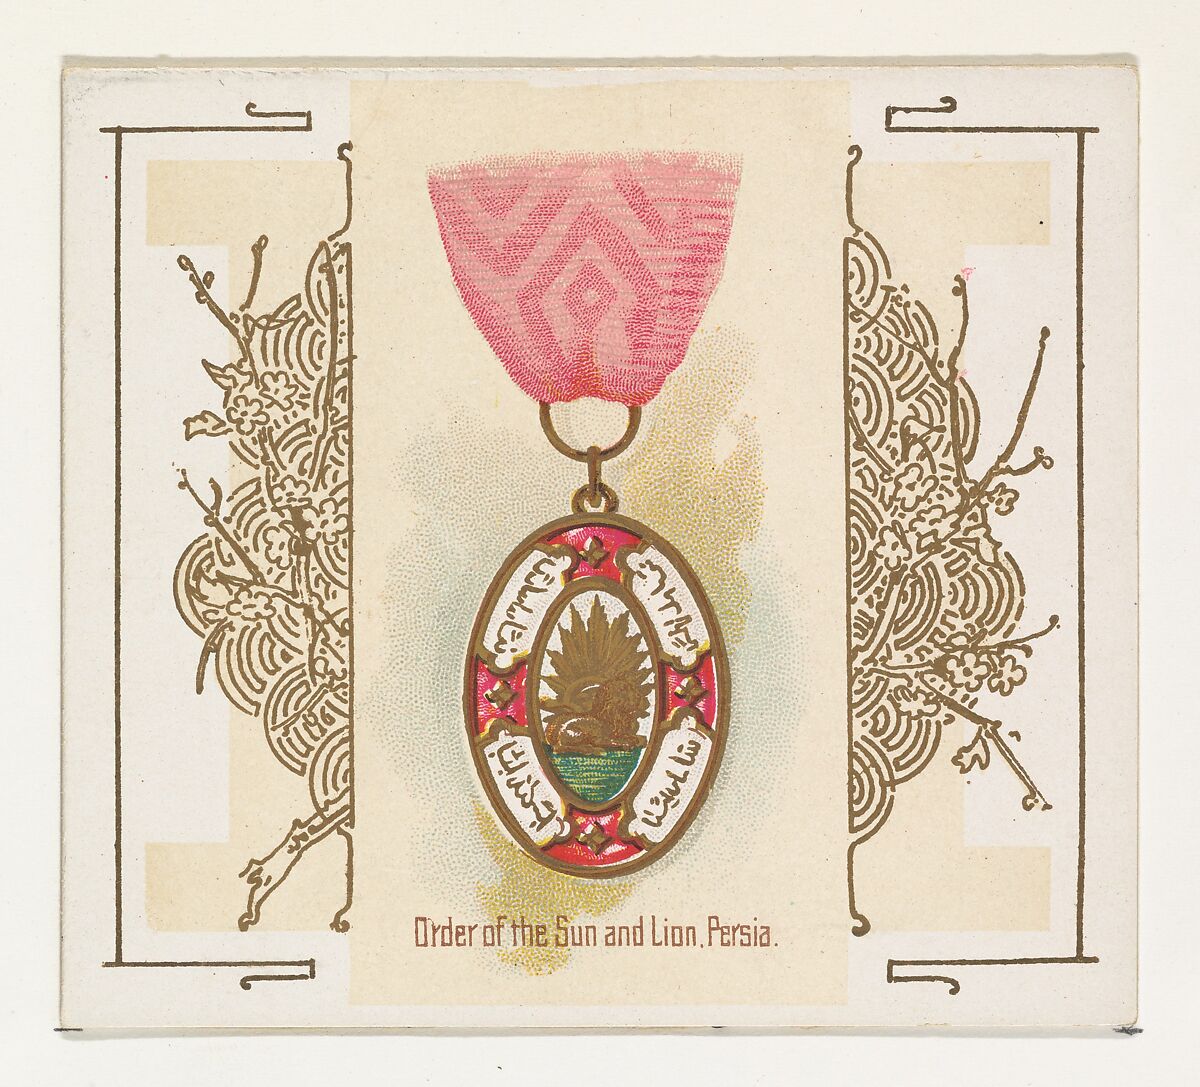 Order of the Sun and Lion, Persia, from the World's Decorations series (N44) for Allen & Ginter Cigarettes, Issued by Allen &amp; Ginter (American, Richmond, Virginia), Commercial color lithograph 